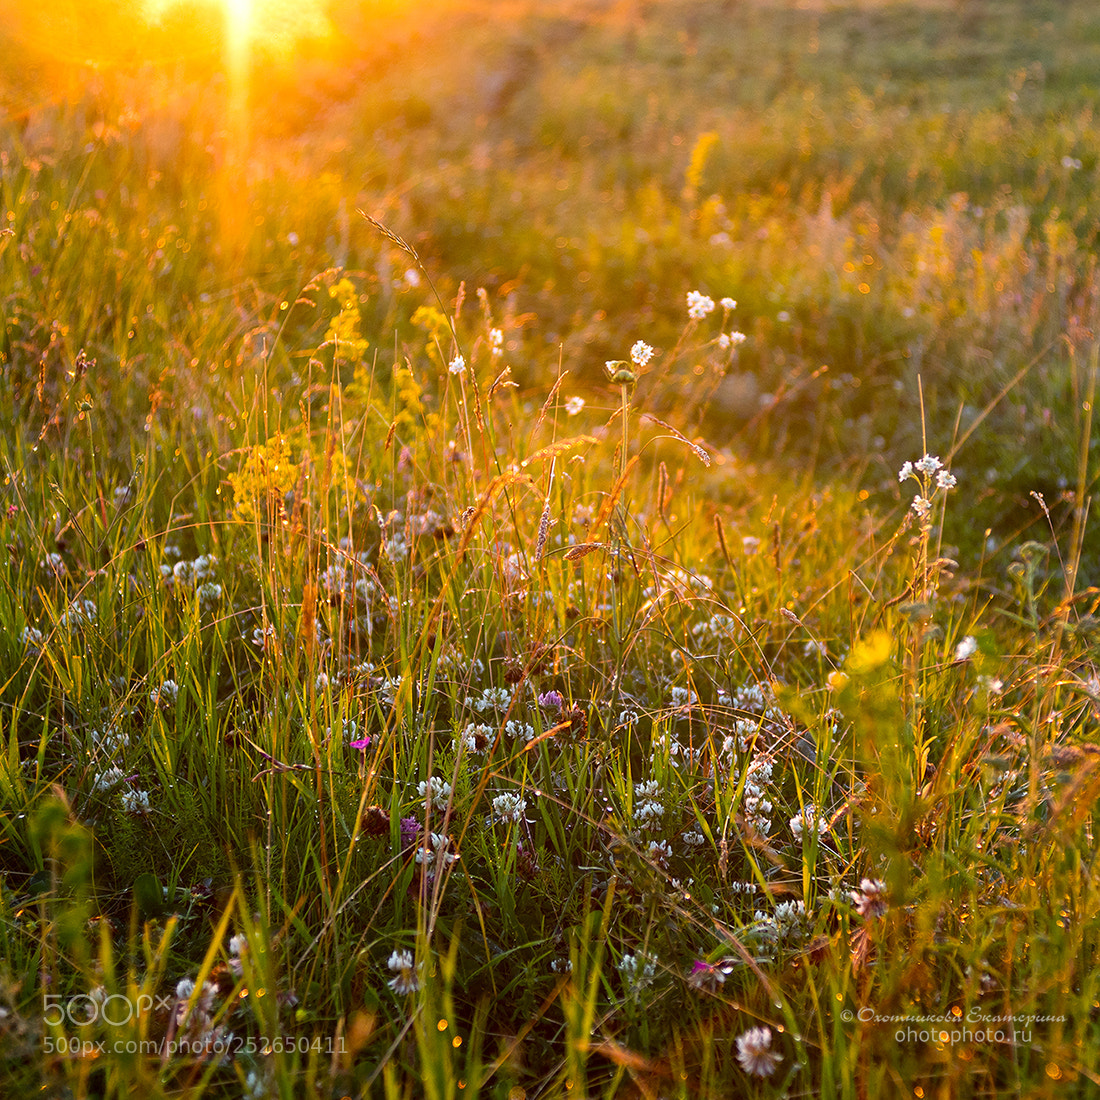 Sony a7 sample photo. Meadow grass in the photography